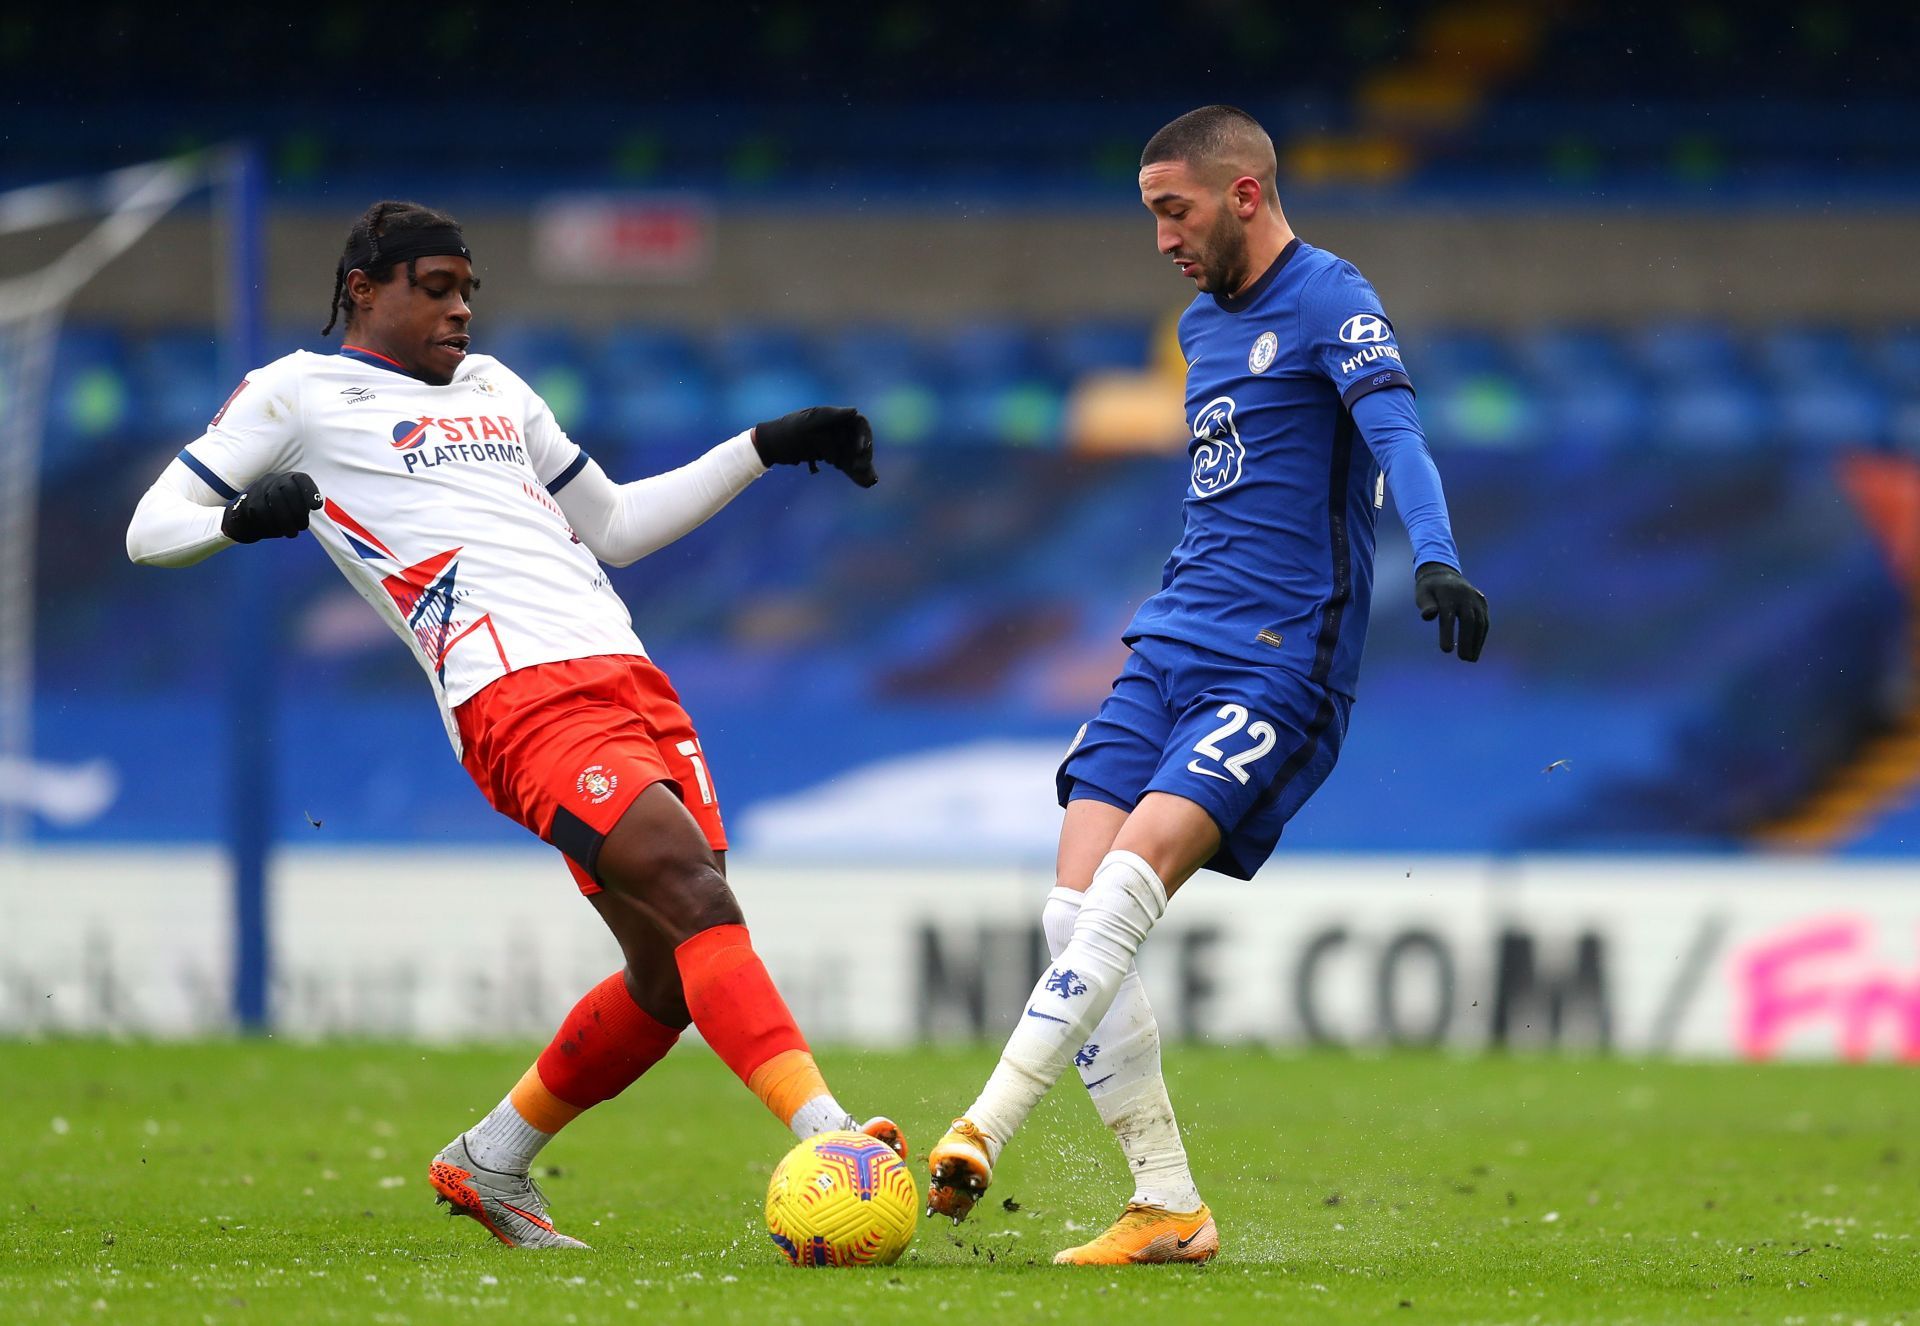 Luton Town and Chelsea square off on Wednesday